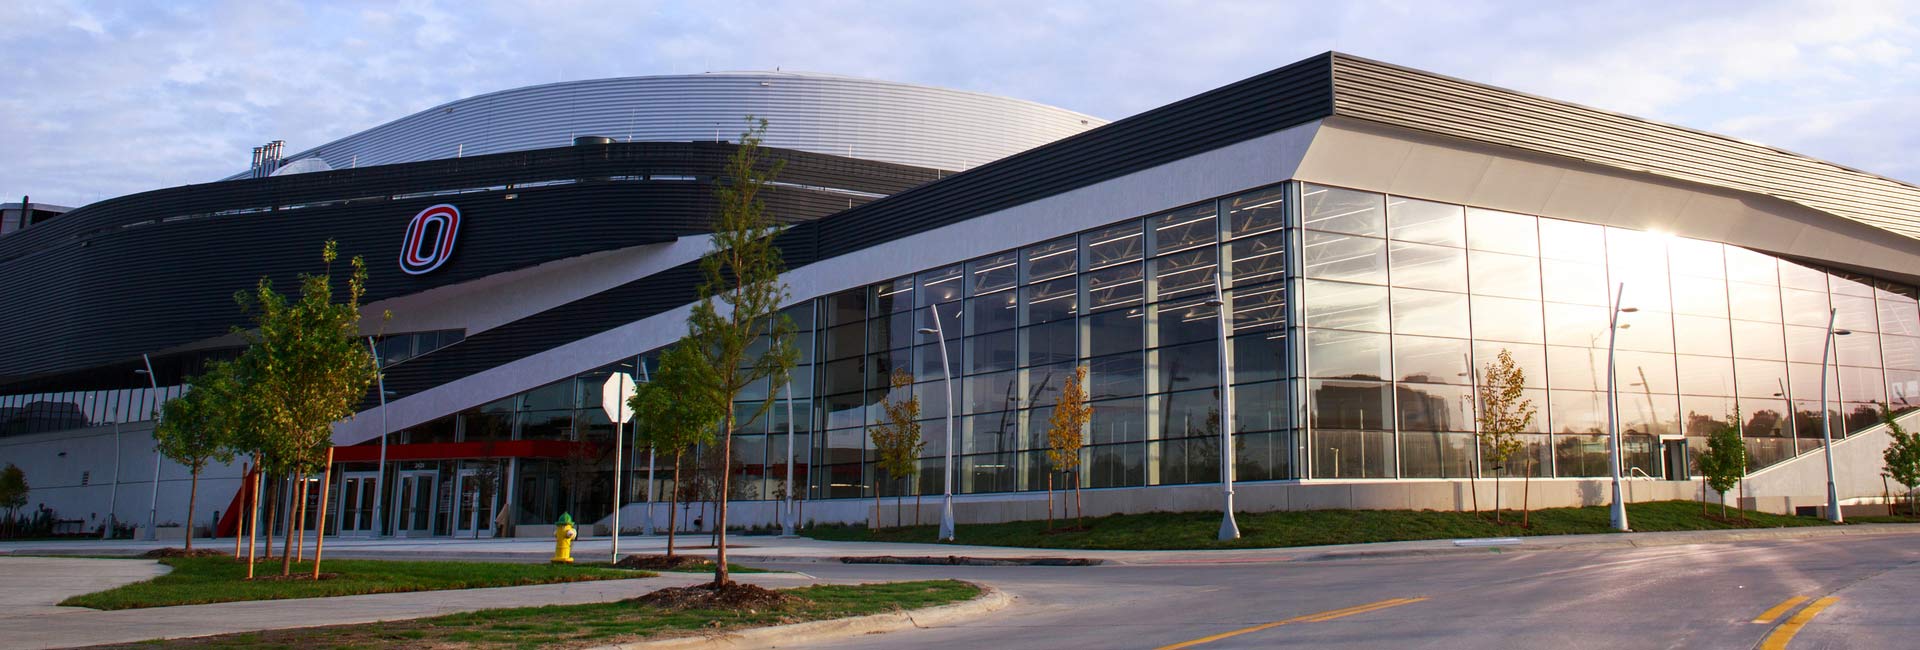 The Mavericks' first game at Baxter Arena is set for 7:07 p.m., Friday, Oct. 23